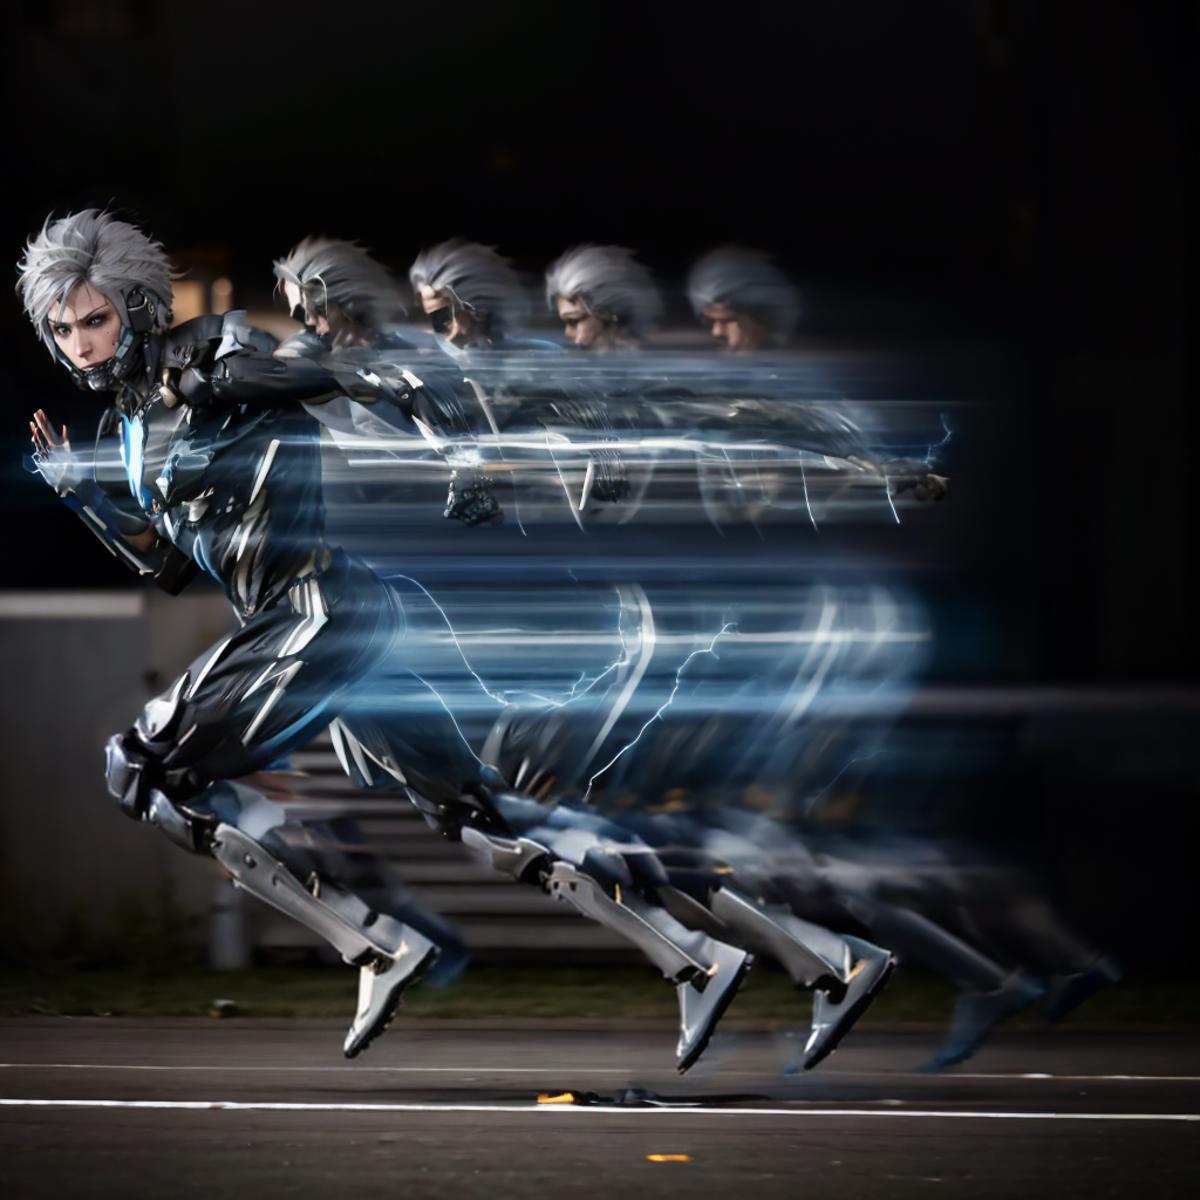 Super speed running Concept [gotta go fast] image by yomama123556778